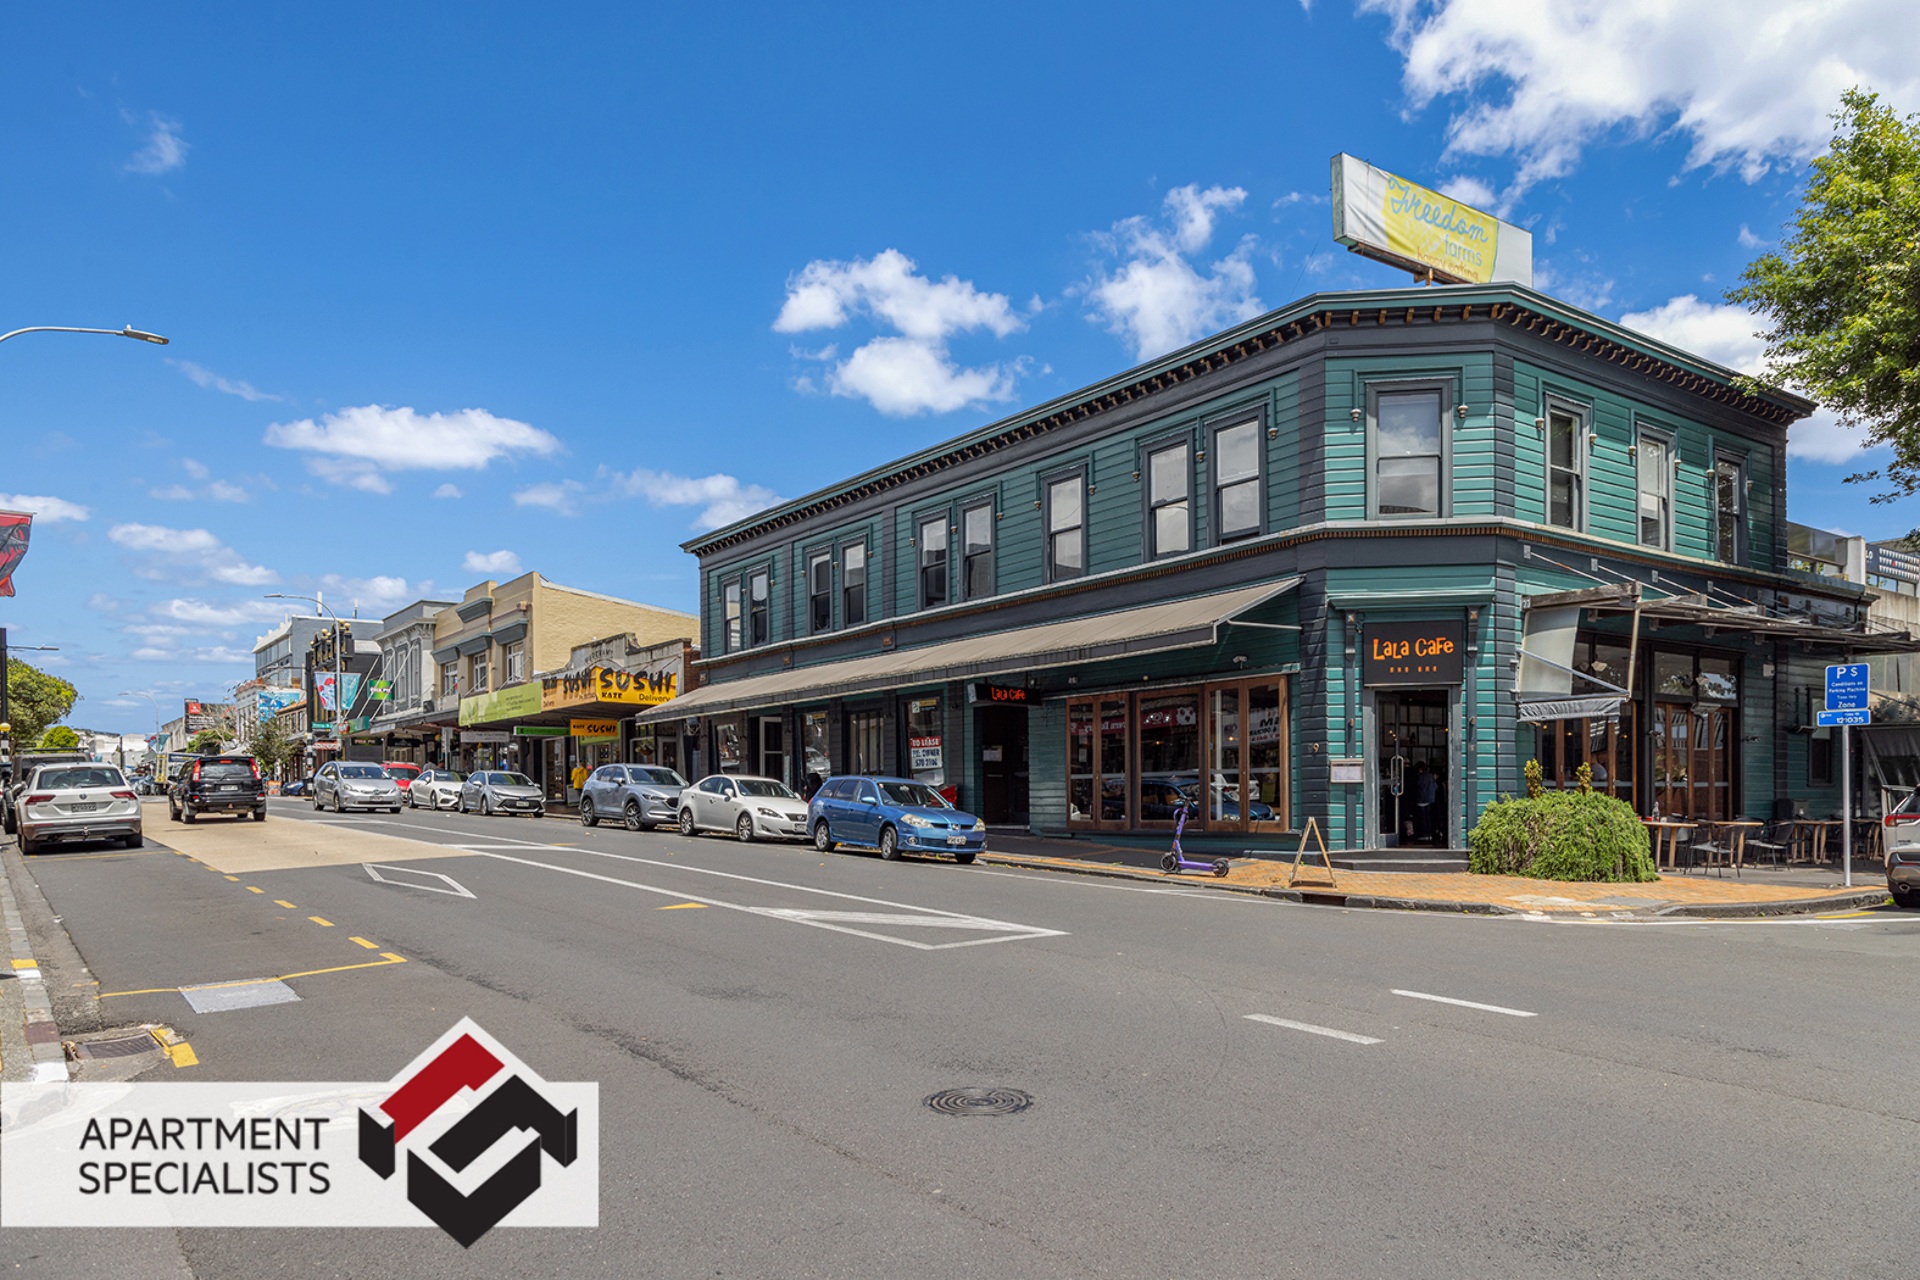 21 | 25 Cheshire Street, Parnell | Apartment Specialists